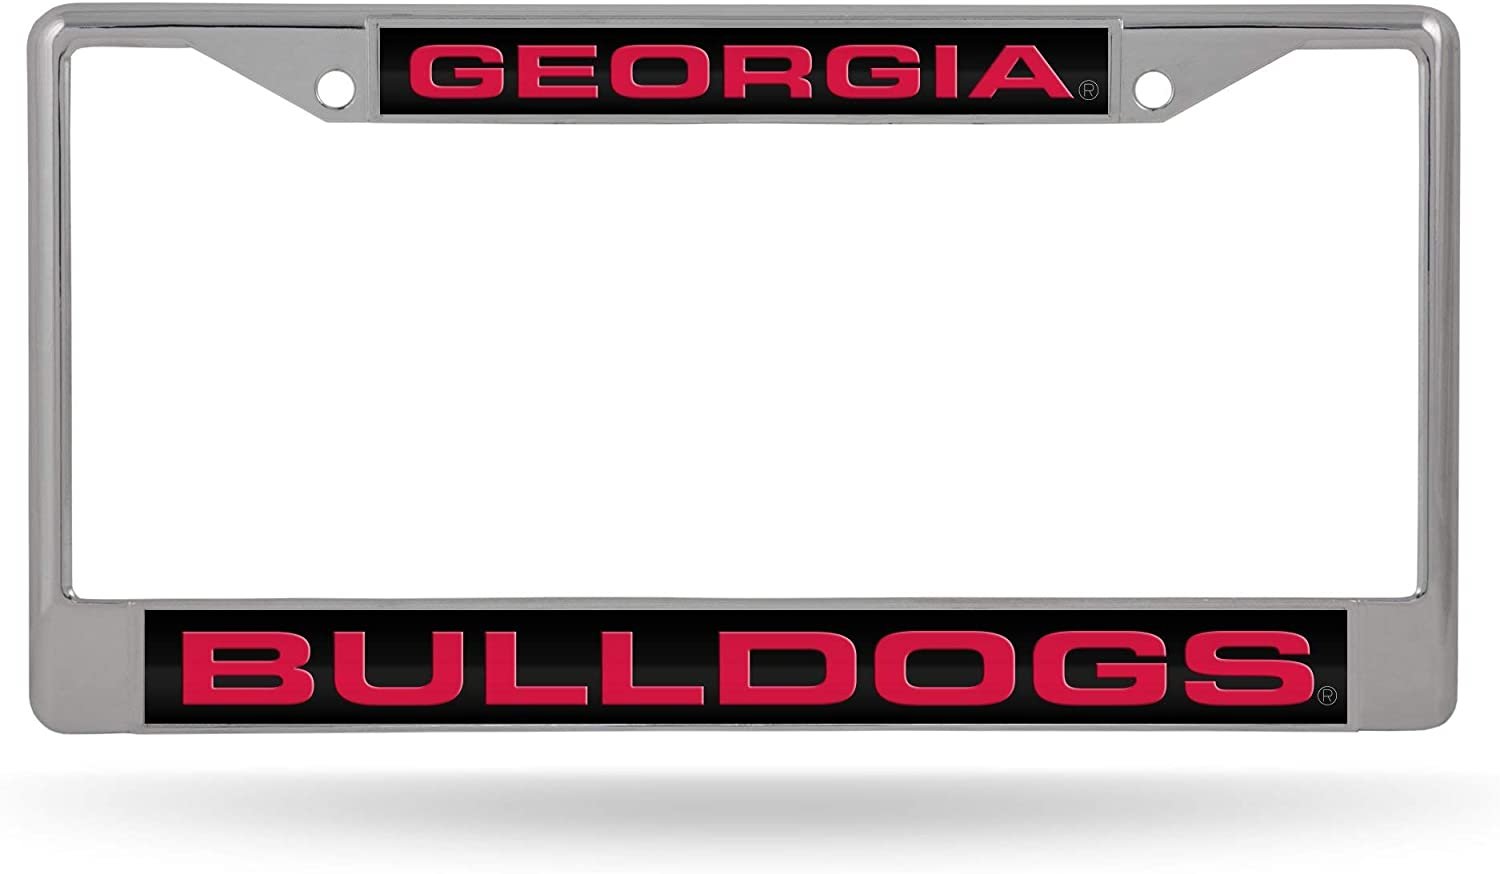 University of Georgia Bulldogs Metal License Plate Frame Chrome Tag Cover, Laser Acrylic Mirrored Inserts, 12x6 Inch